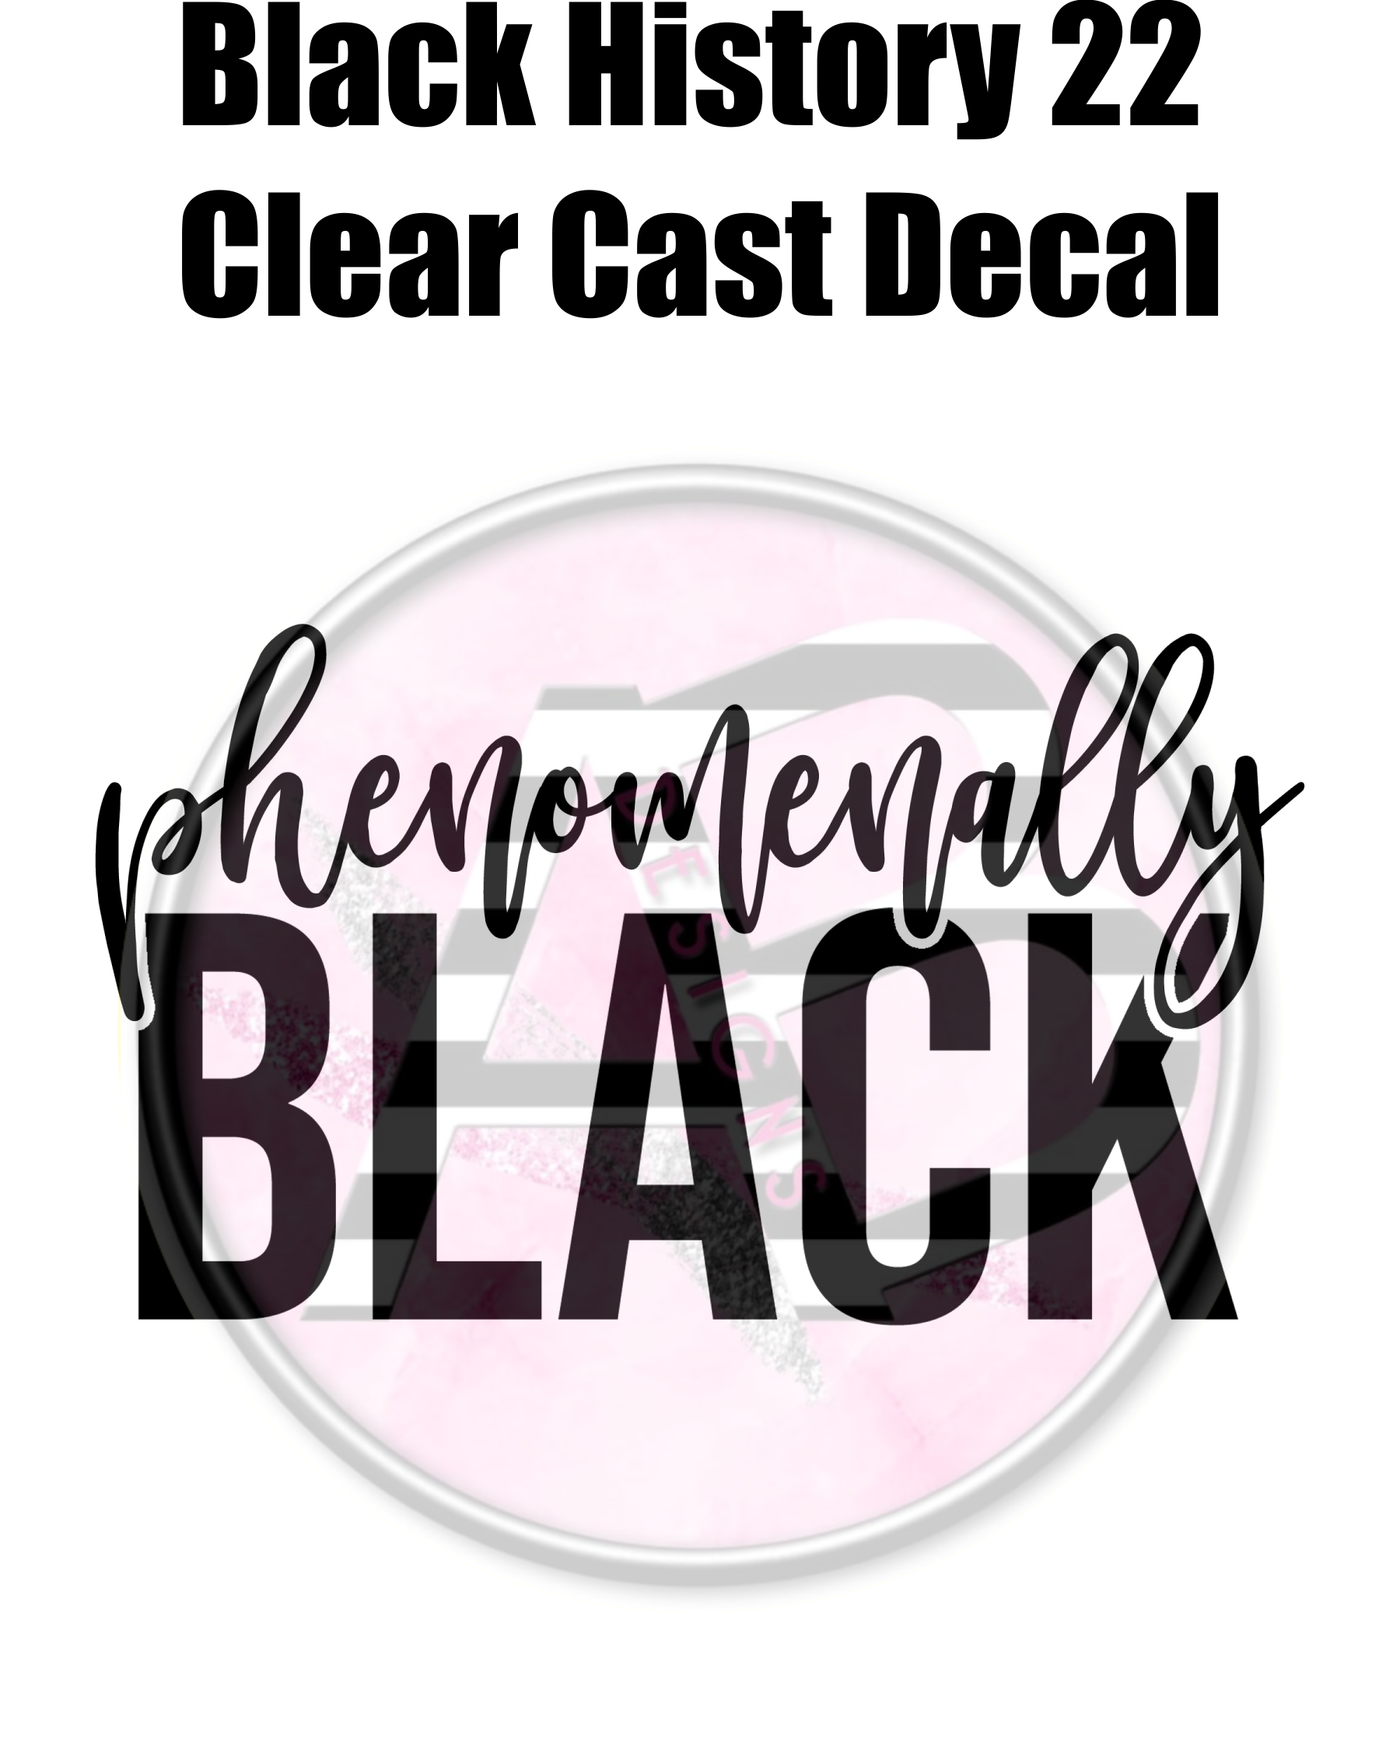 Black History 22 - Clear Cast Decal